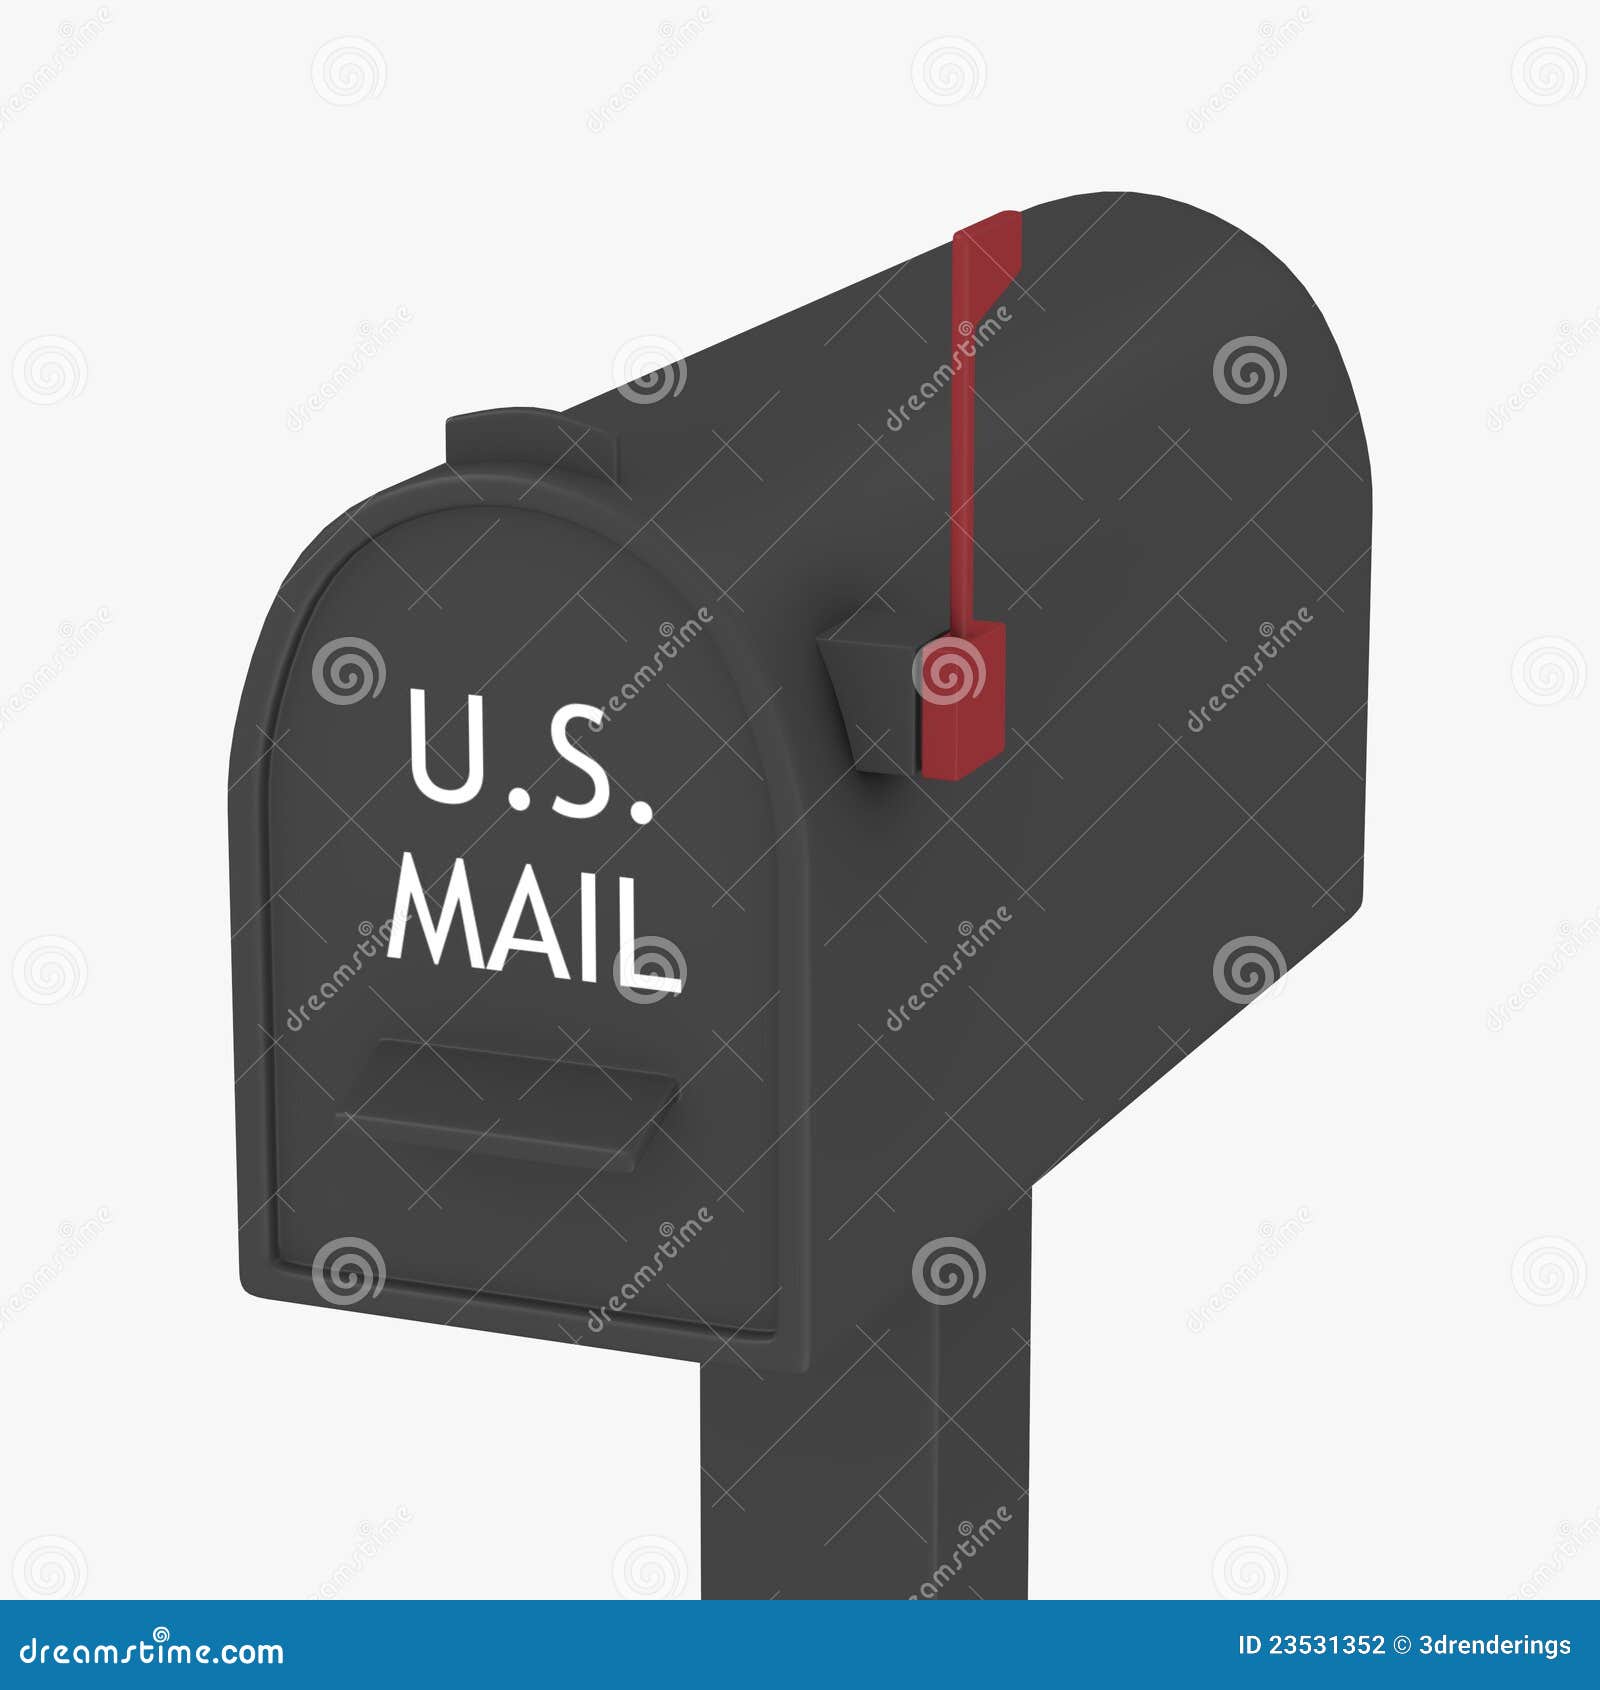 3d render of mail box - USA type